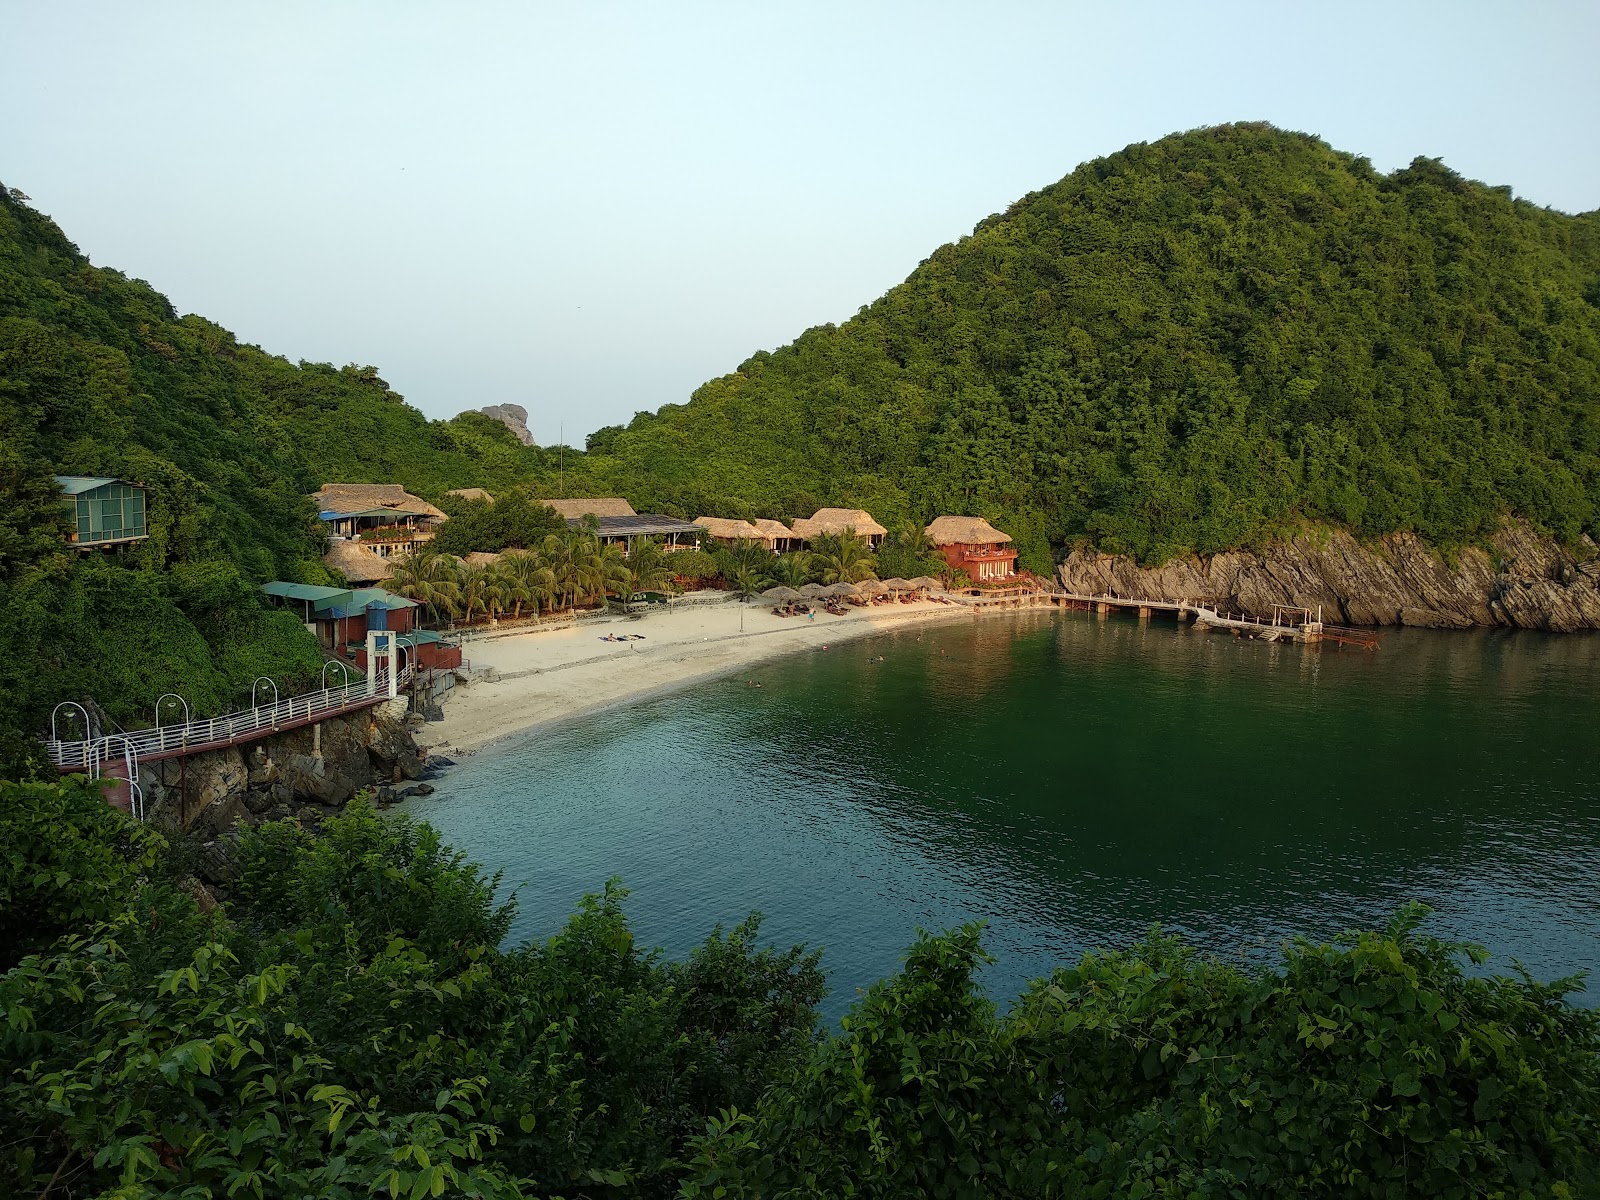 Photo of Monkey Island Resort - popular place among relax connoisseurs